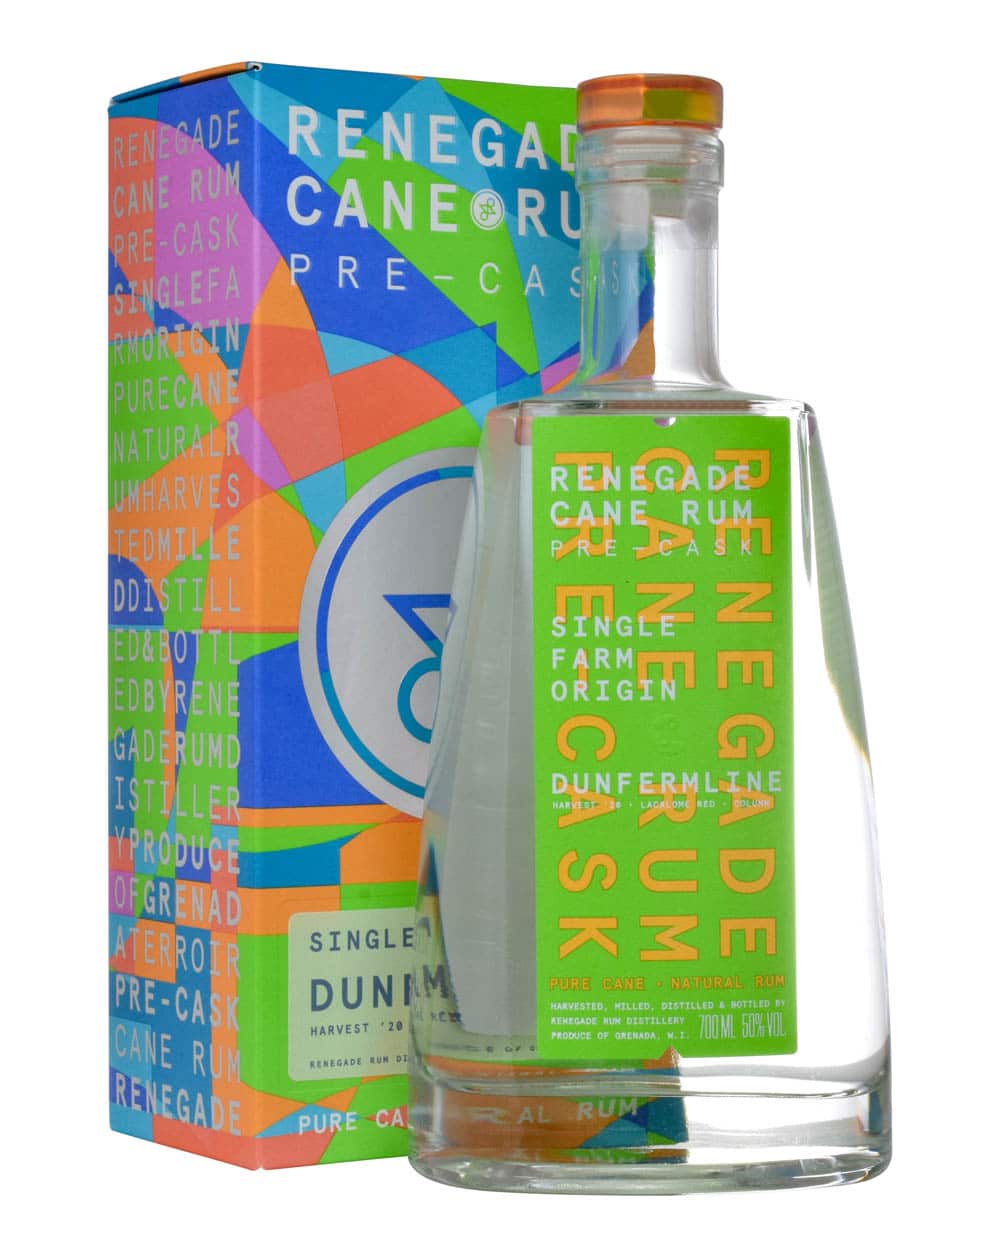 Renegade Cane Rum Pre-Cask Dunfermline Box Musthave Malts MHM